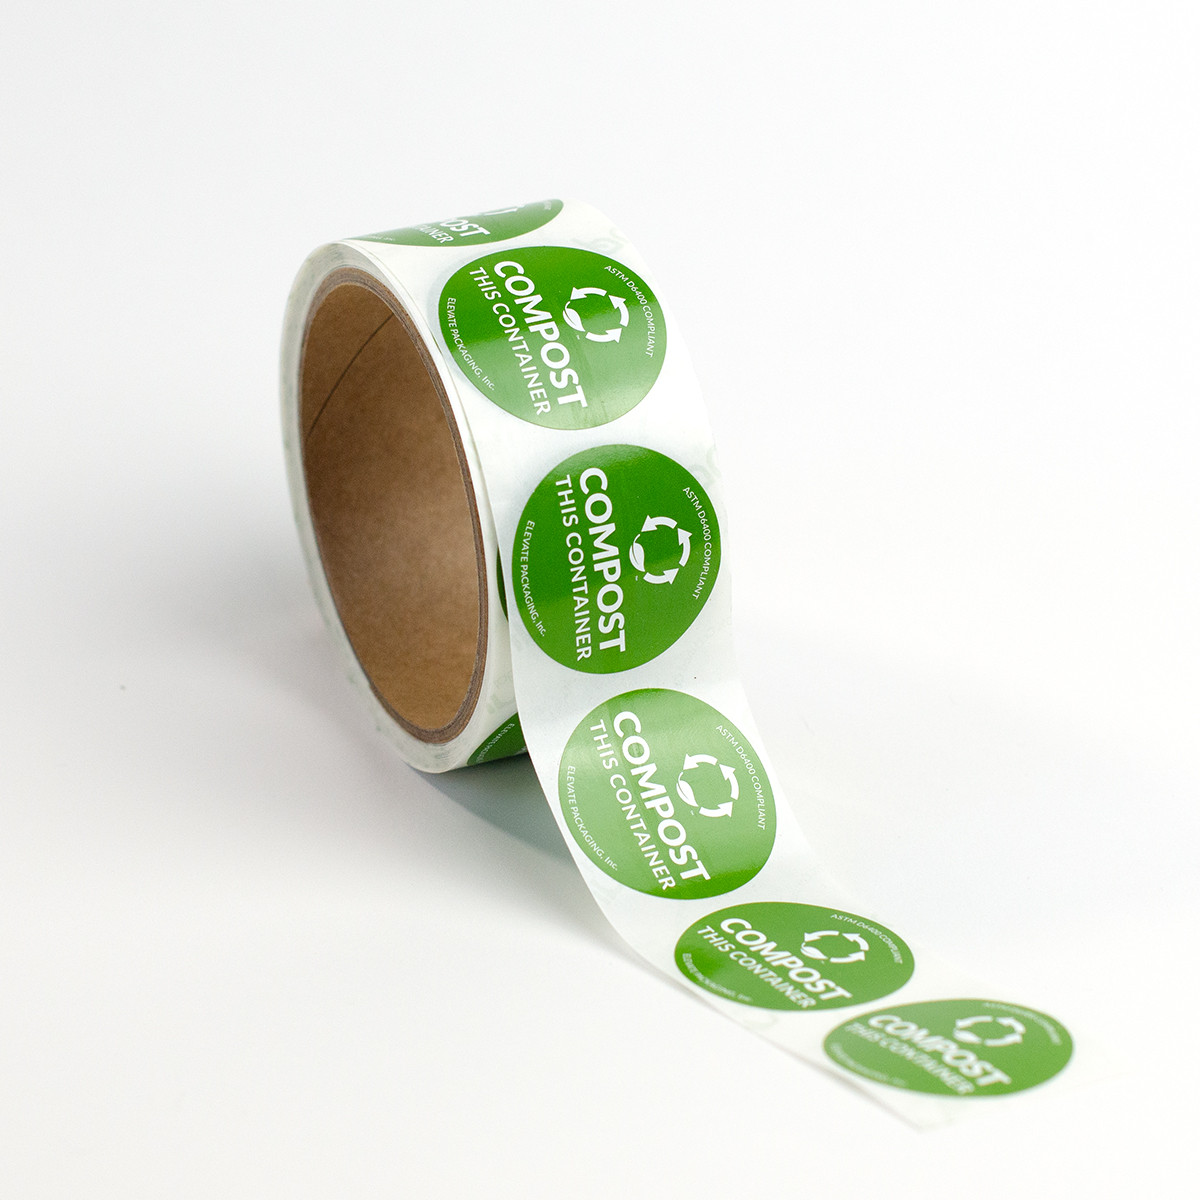 Paper Food Wrap - Compostable Food Wrapper - Go-Compost